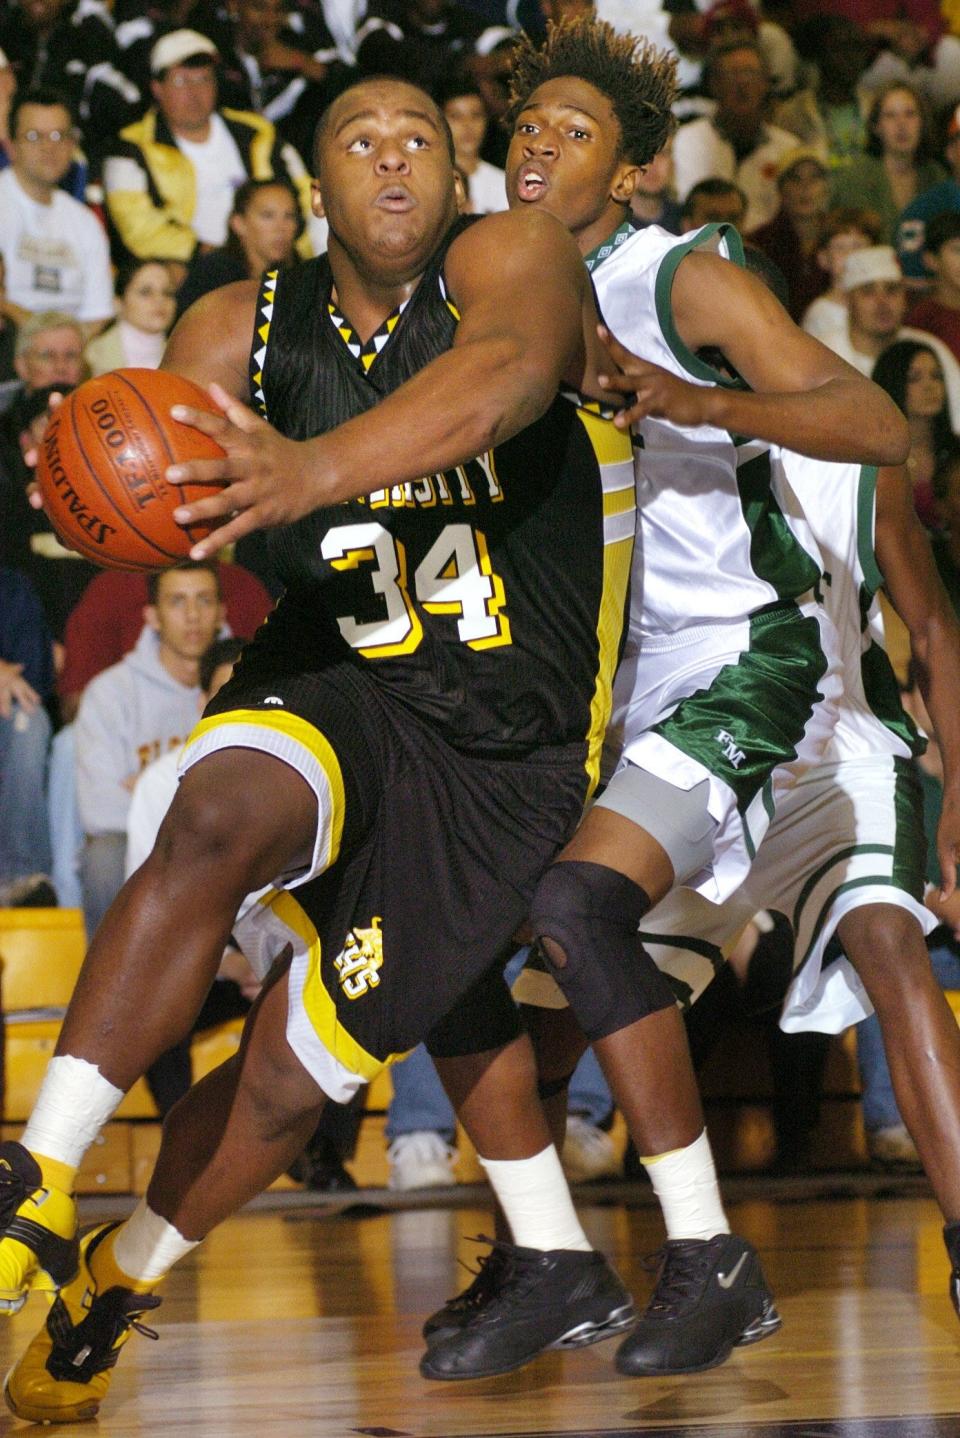 LSU Lab center Glen Davis drives towards the basket ahead of Fort Myers forward Dorvil Dorvilus during the Bank of America City of Palms Classic at Bishop Verot High School on Dec. 18, 2003.